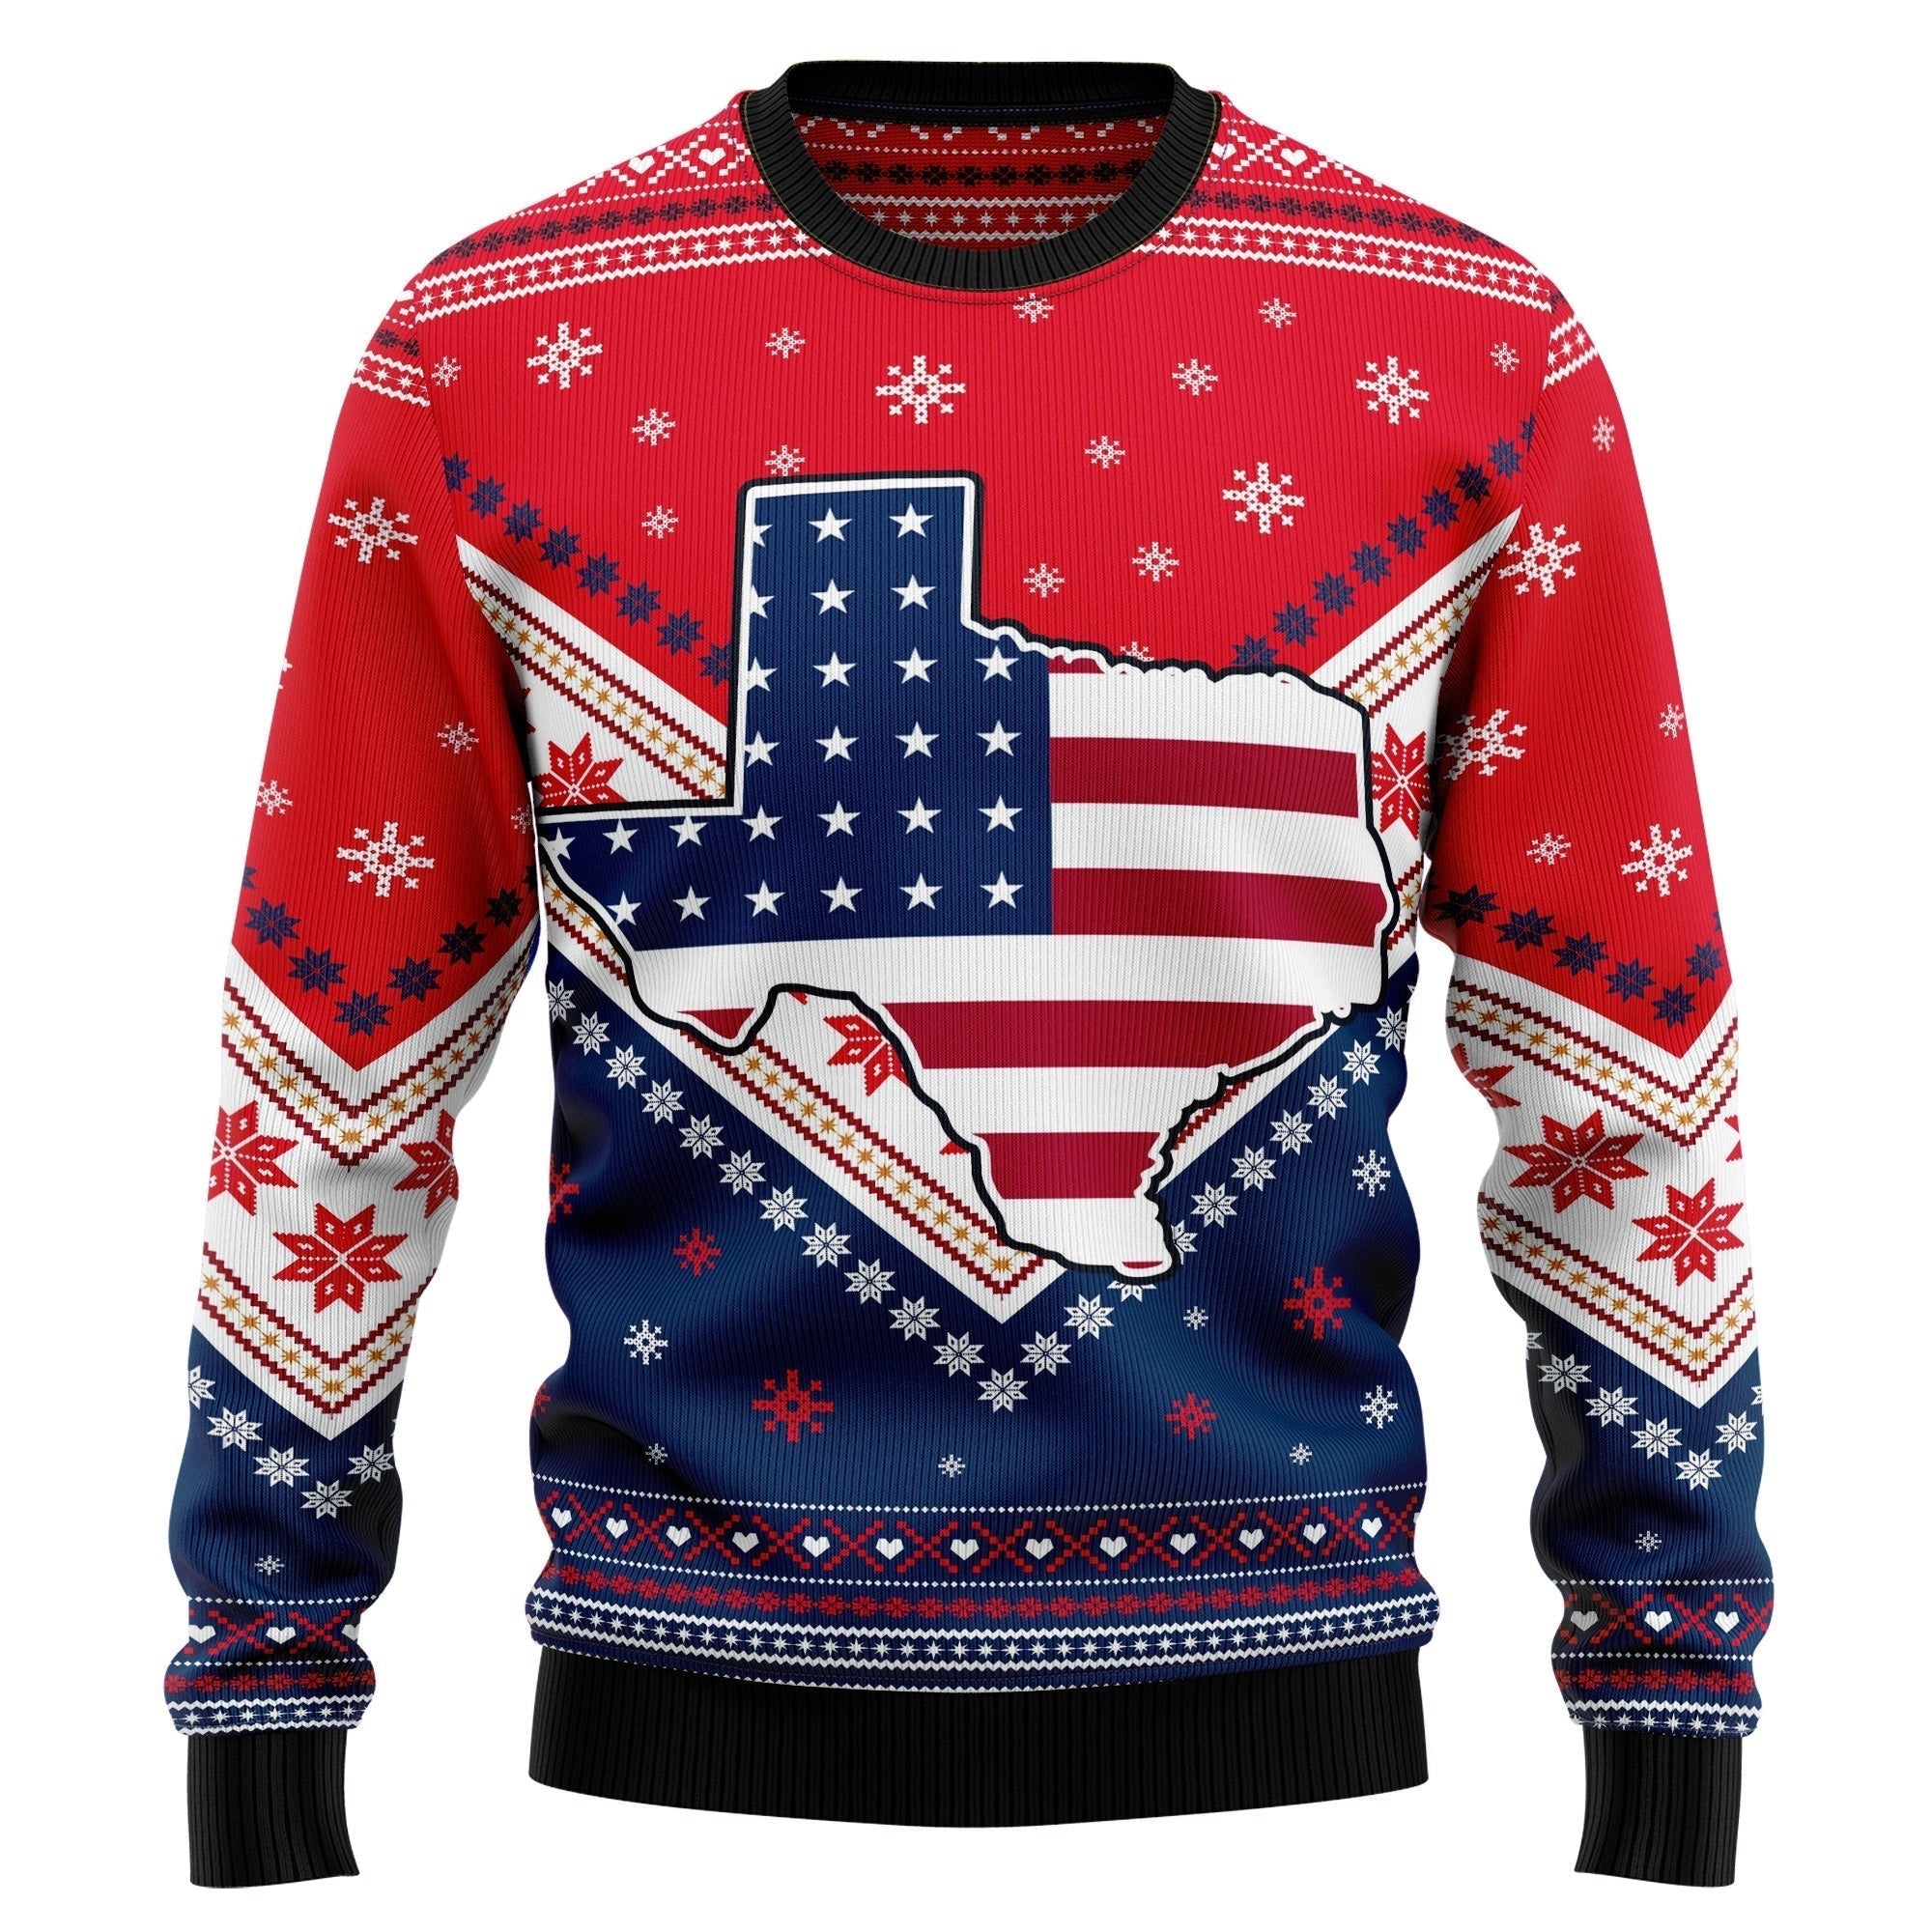 Texas Usa Flag Ugly Christmas Sweater, Perfect Gift and Outfit For Christmas, Winter, New Year Of Texas Lovers